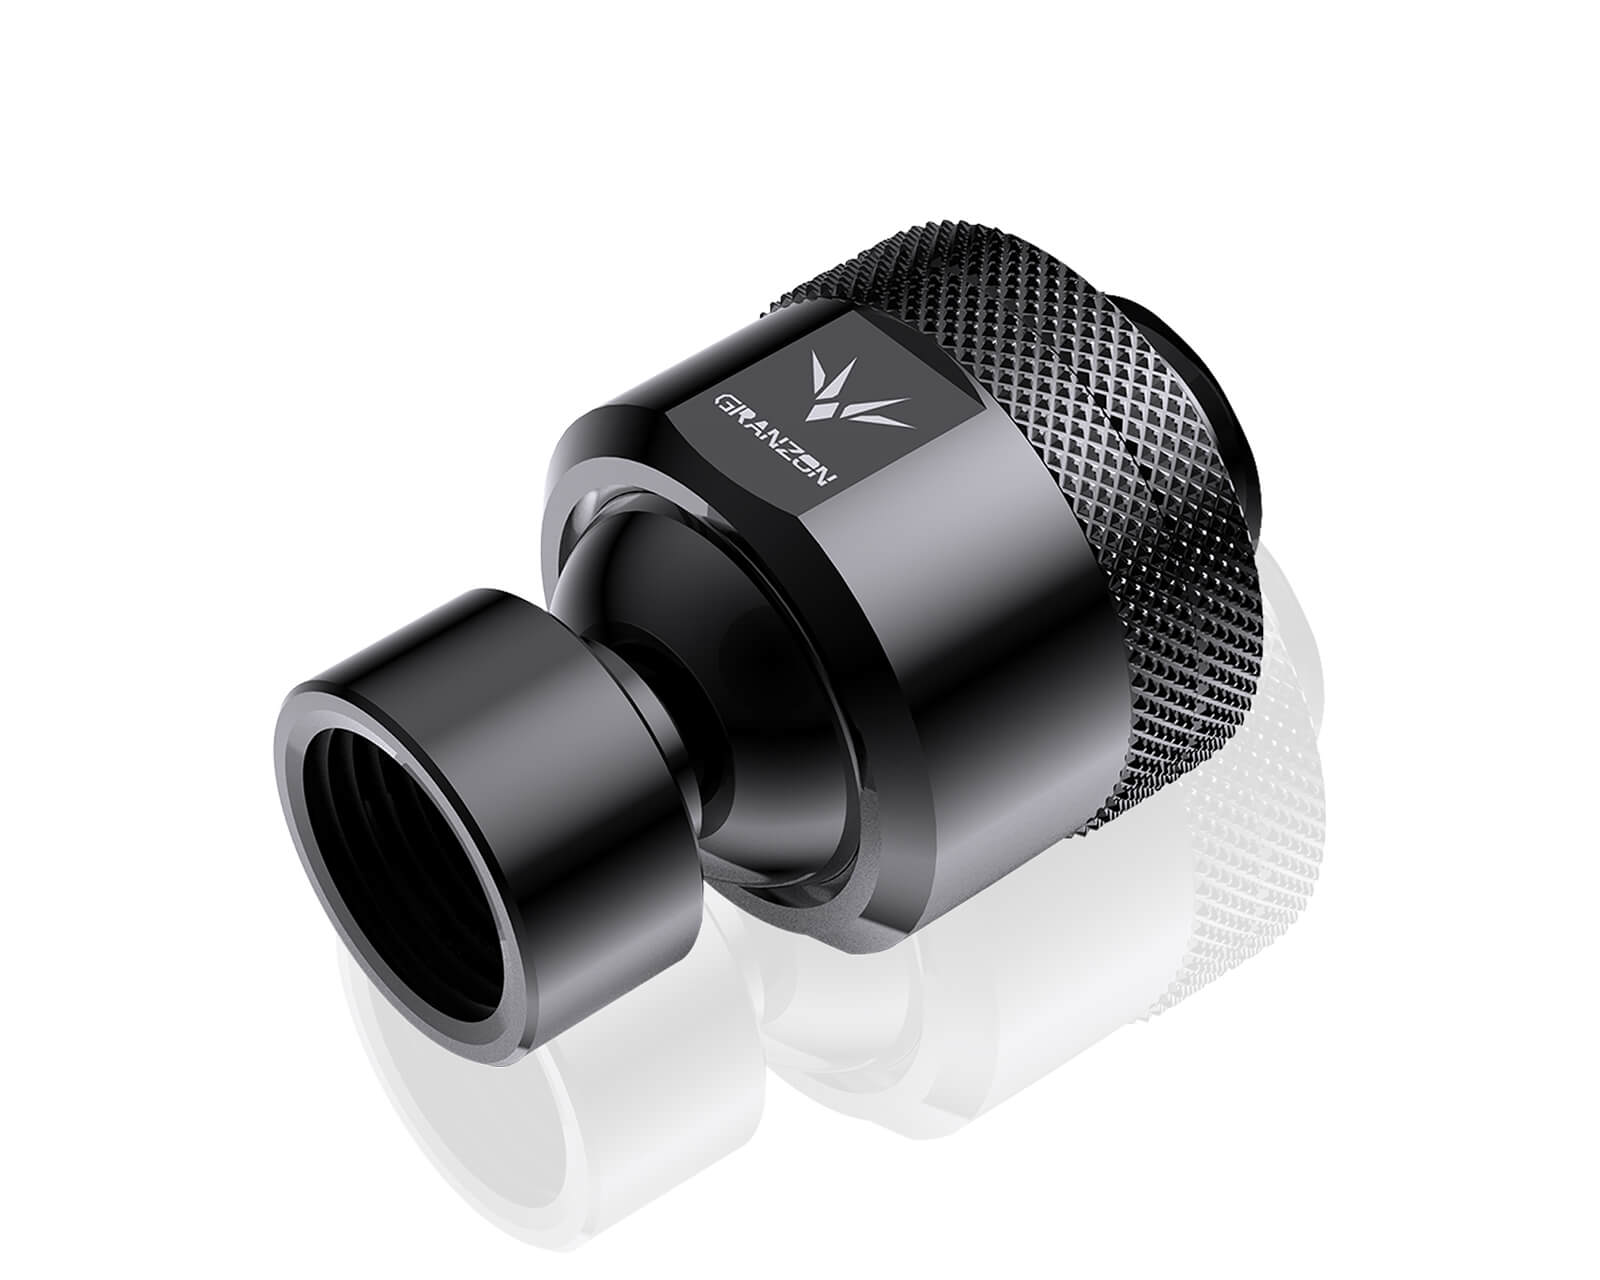 Granzon G 1/4in. Male to Female Multi Directional Free Rotary Elbow Fitting (GD-X) - PrimoChill - KEEPING IT COOL Black